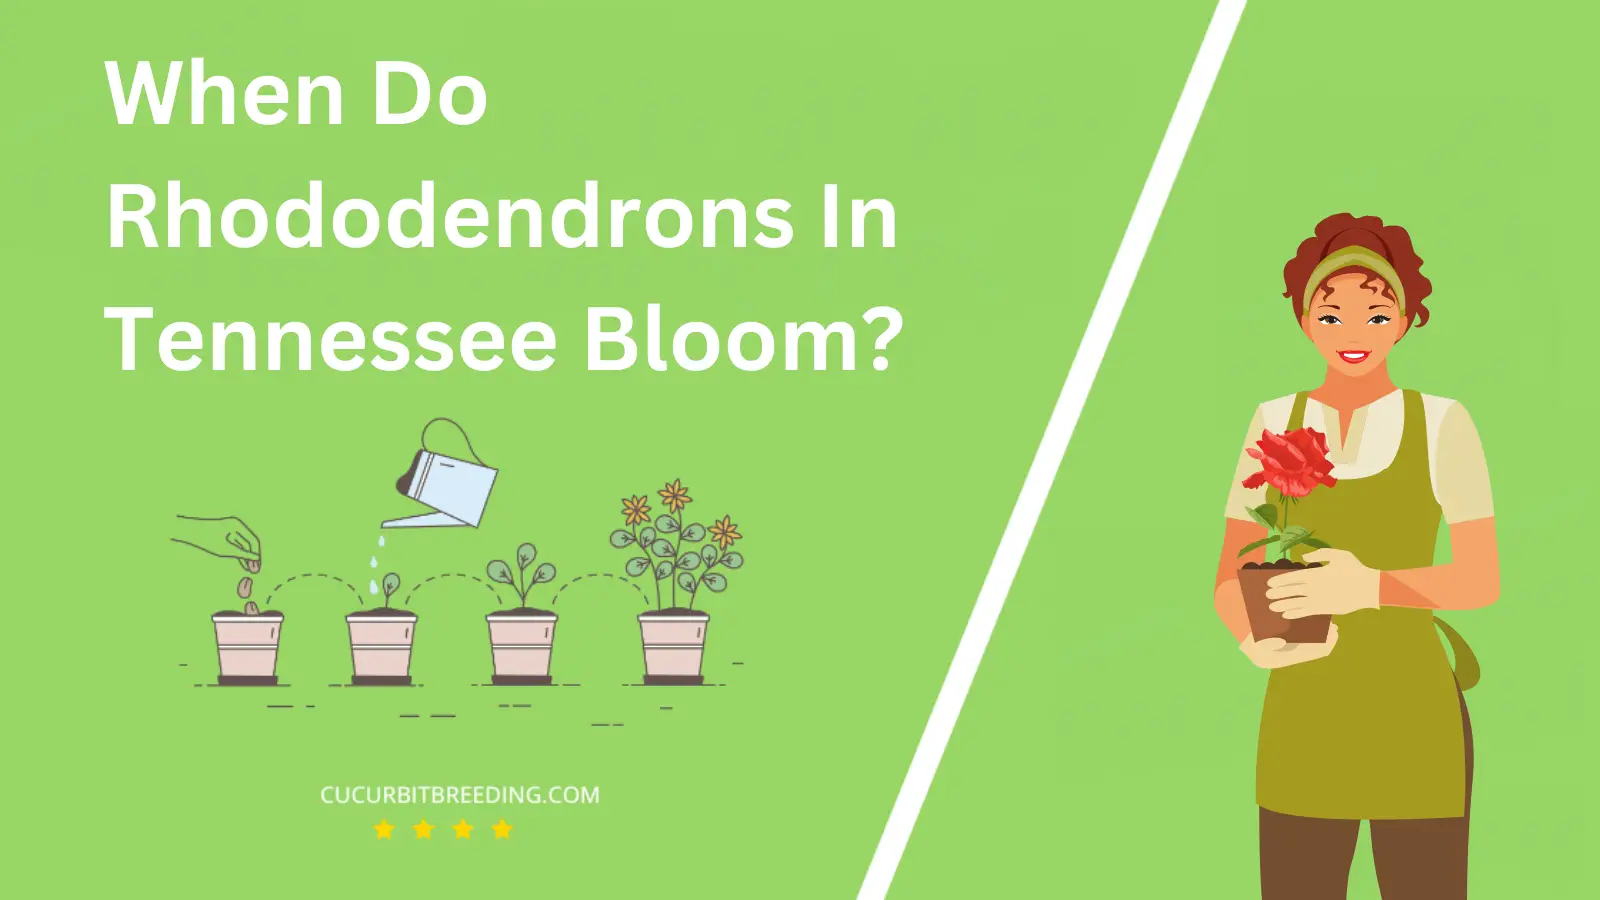 When Do Rhododendrons In Tennessee Bloom?